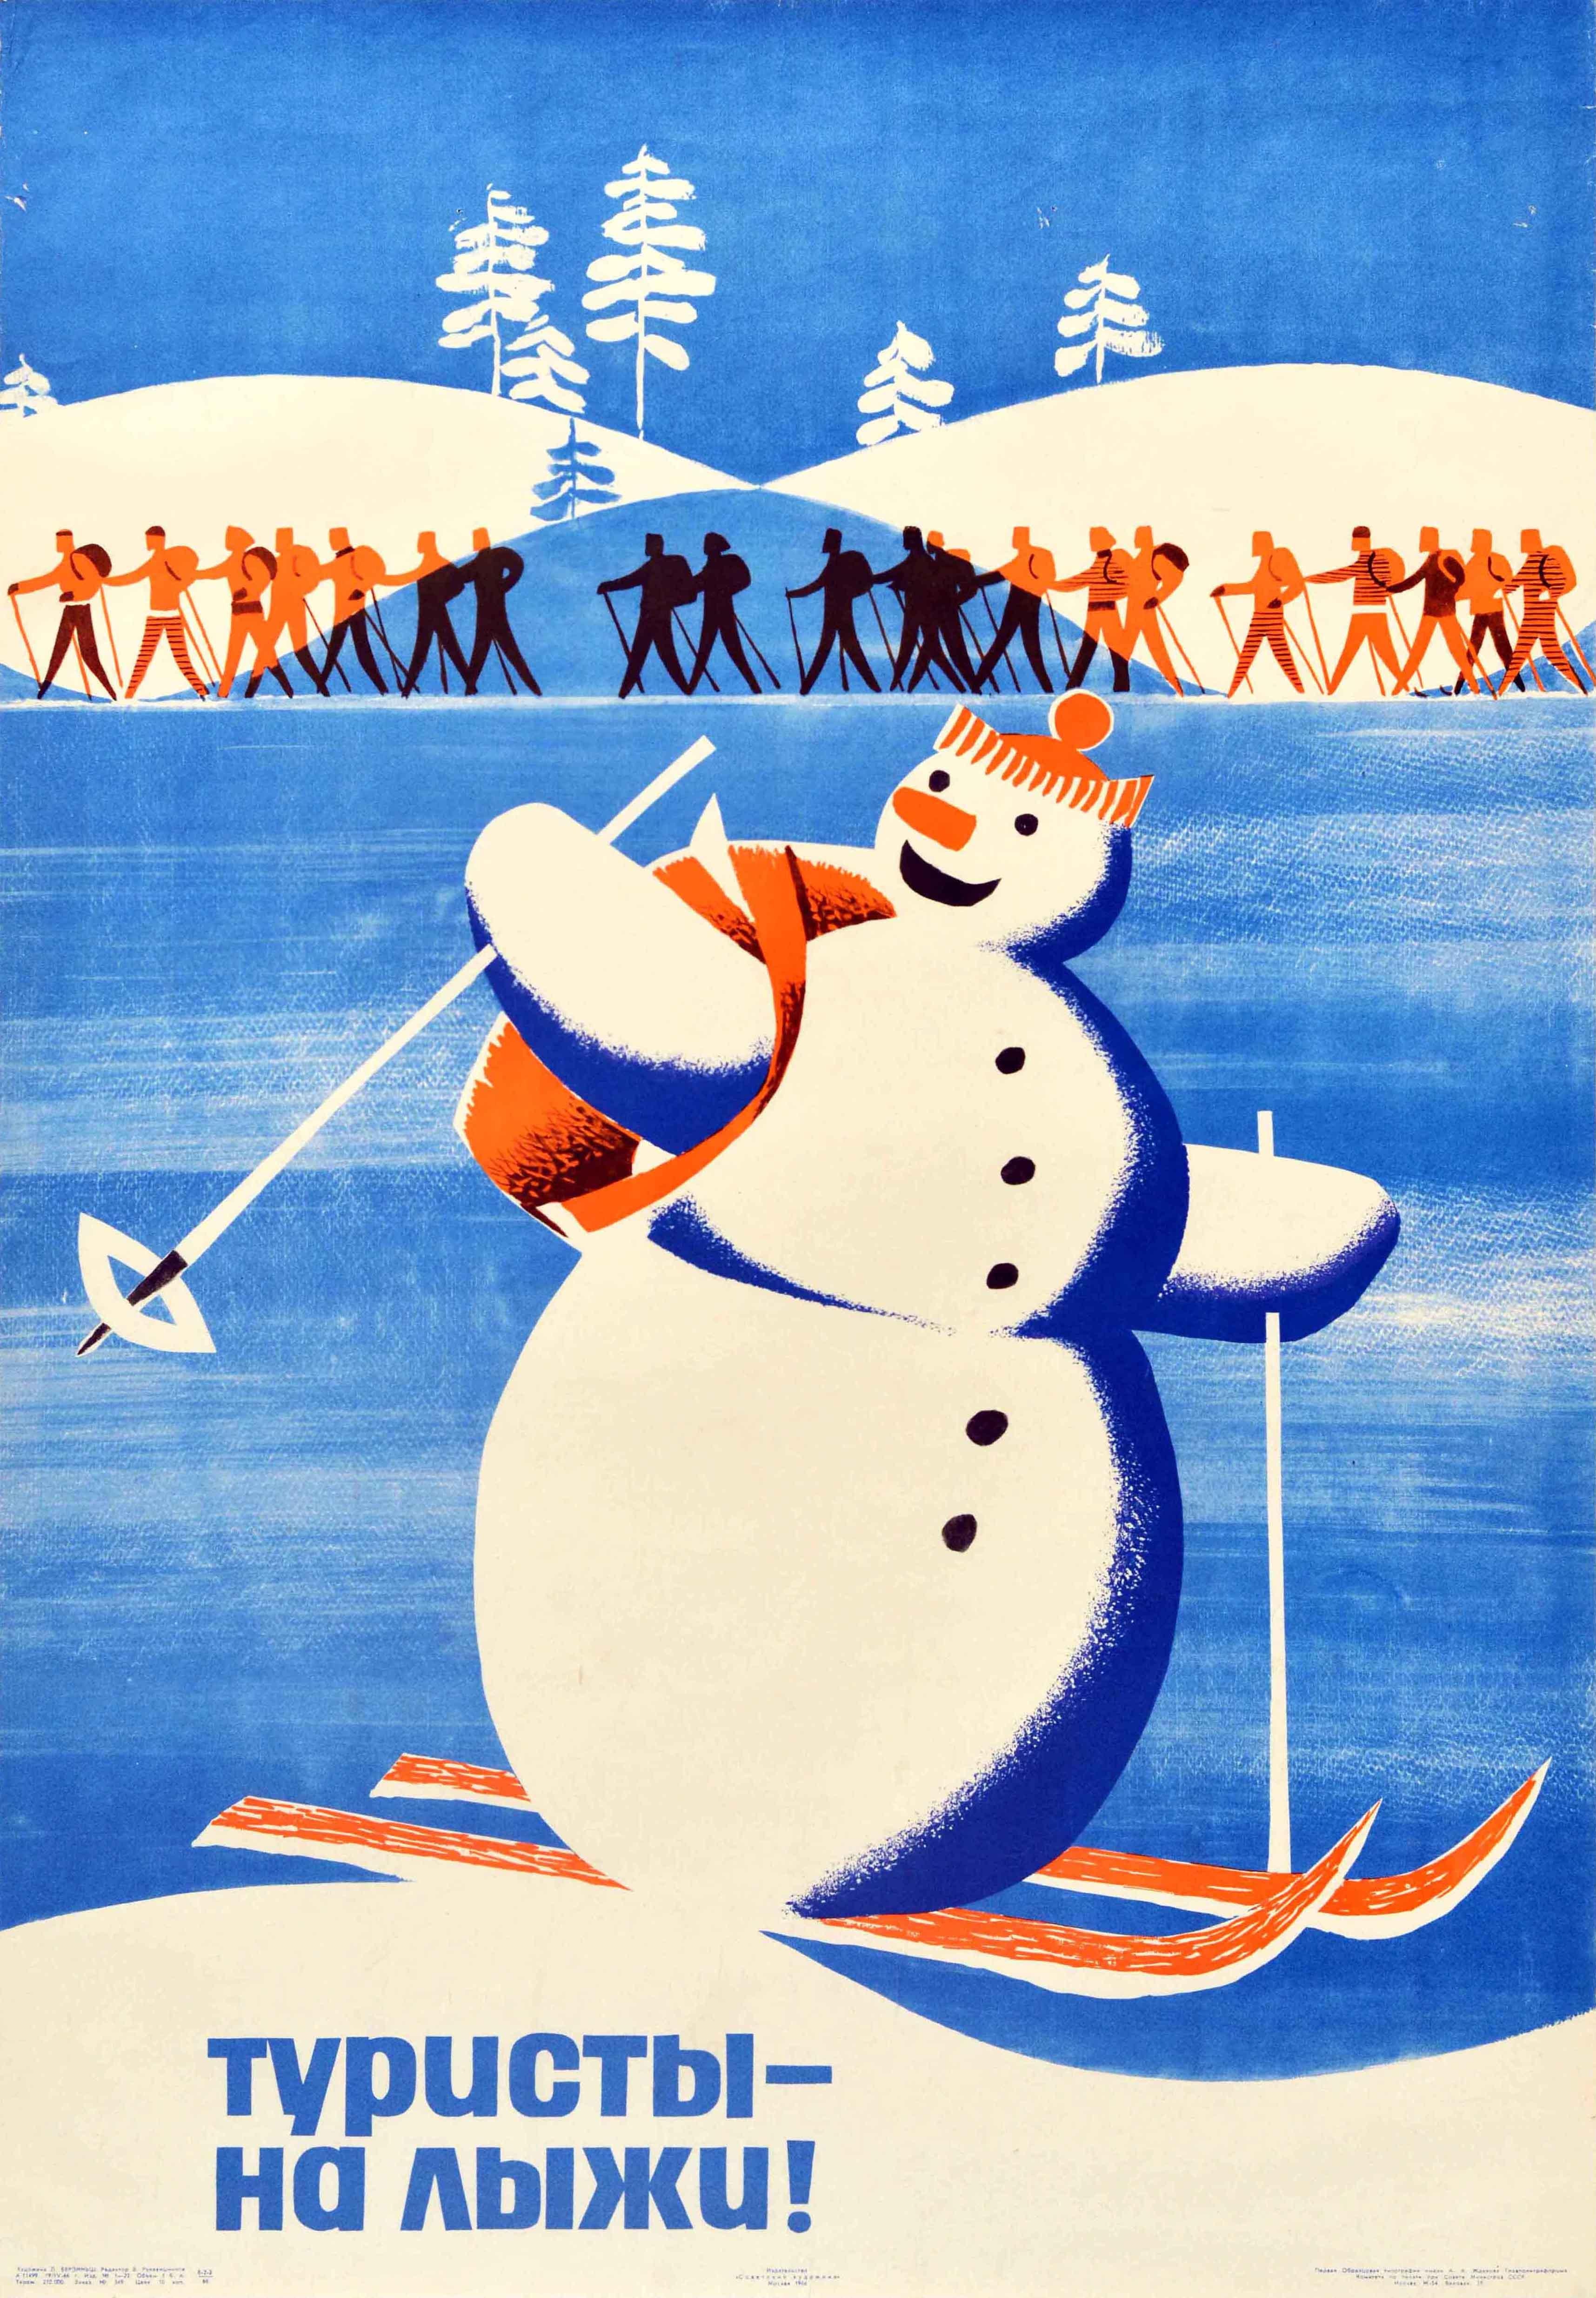 Original vintage Soviet travel poster featuring a fun illustration of a snowman on skis waving at people going cross-country skiing in front of snow topped hills and trees in the background, the caption below the image reads - Tourists get on skis!